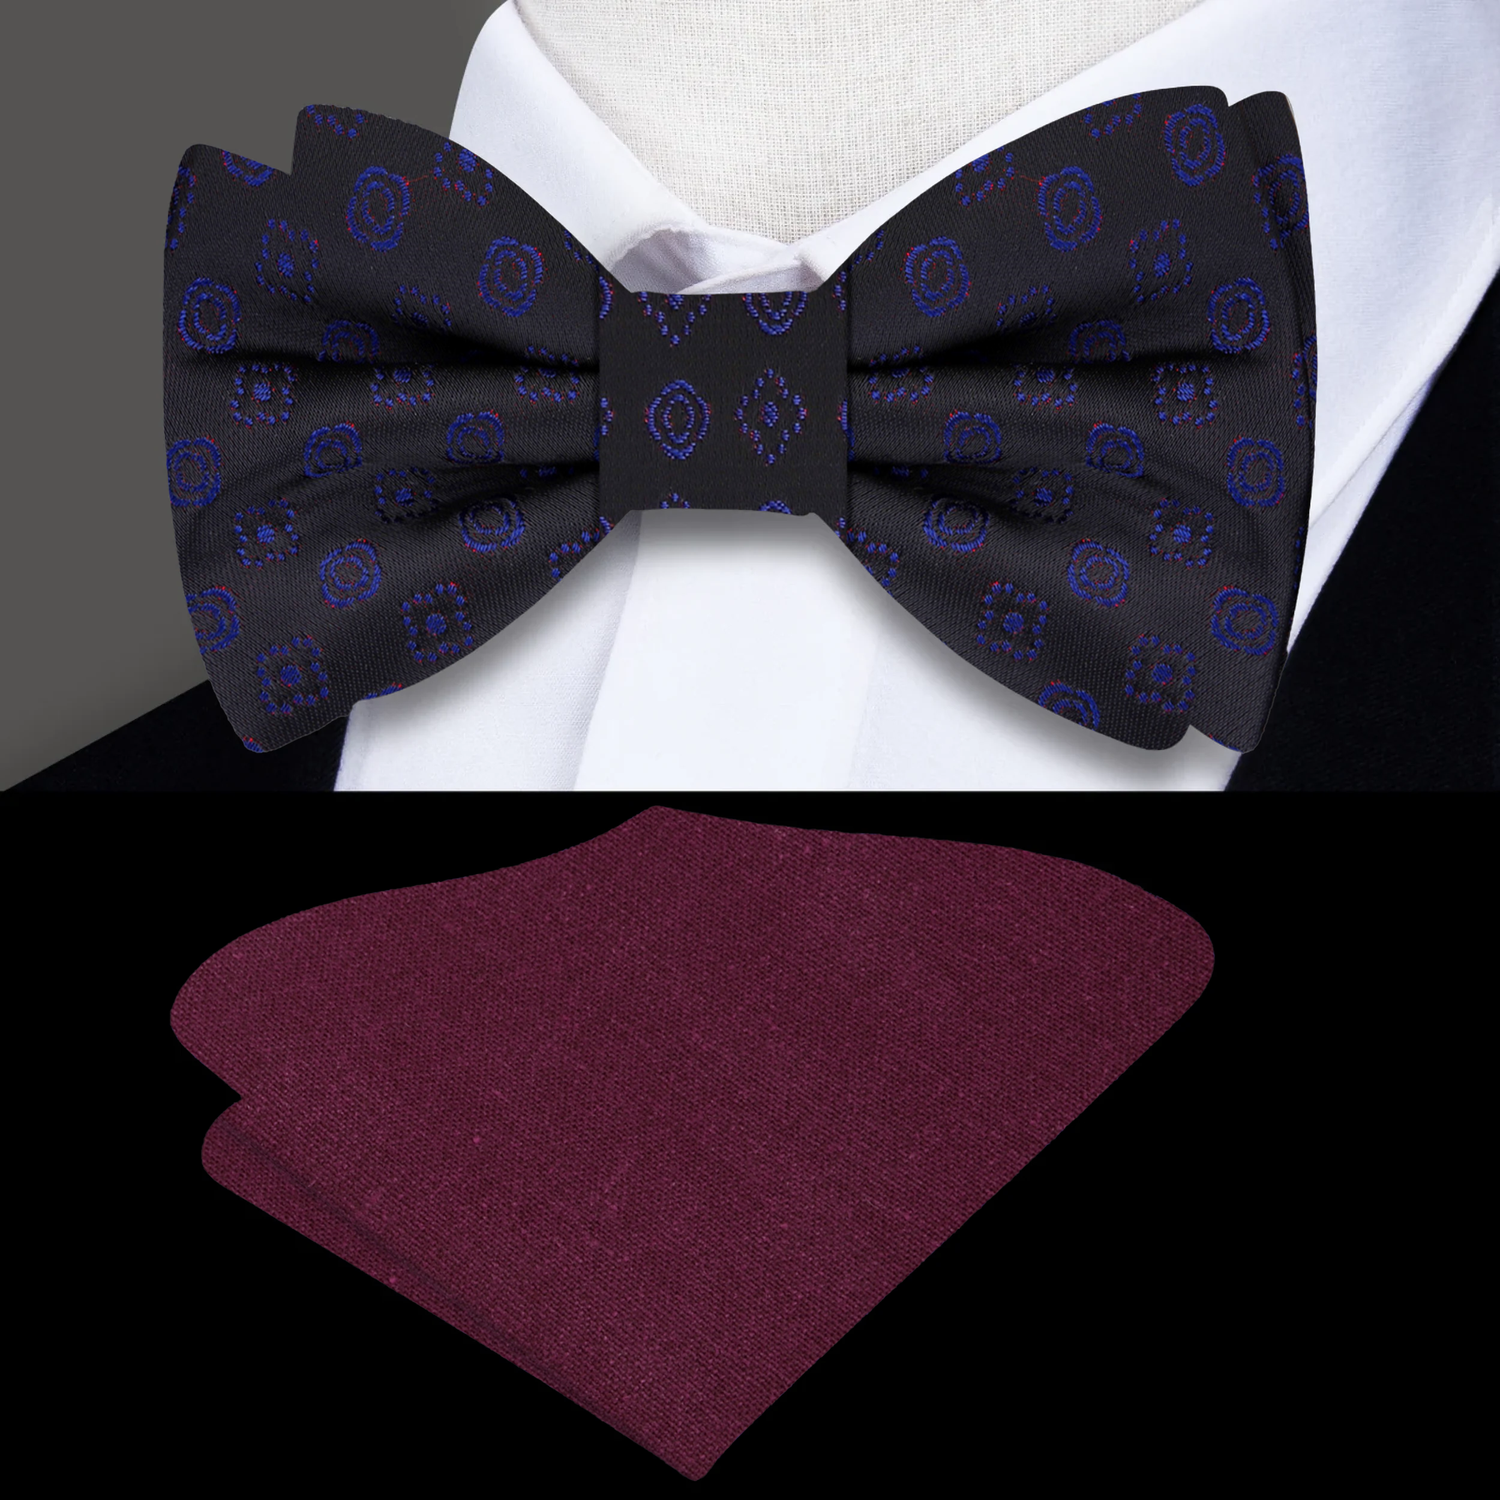 Black, Blue, Red Flowers Bow Tie and Red Pocket Square||Black, Blue, Red